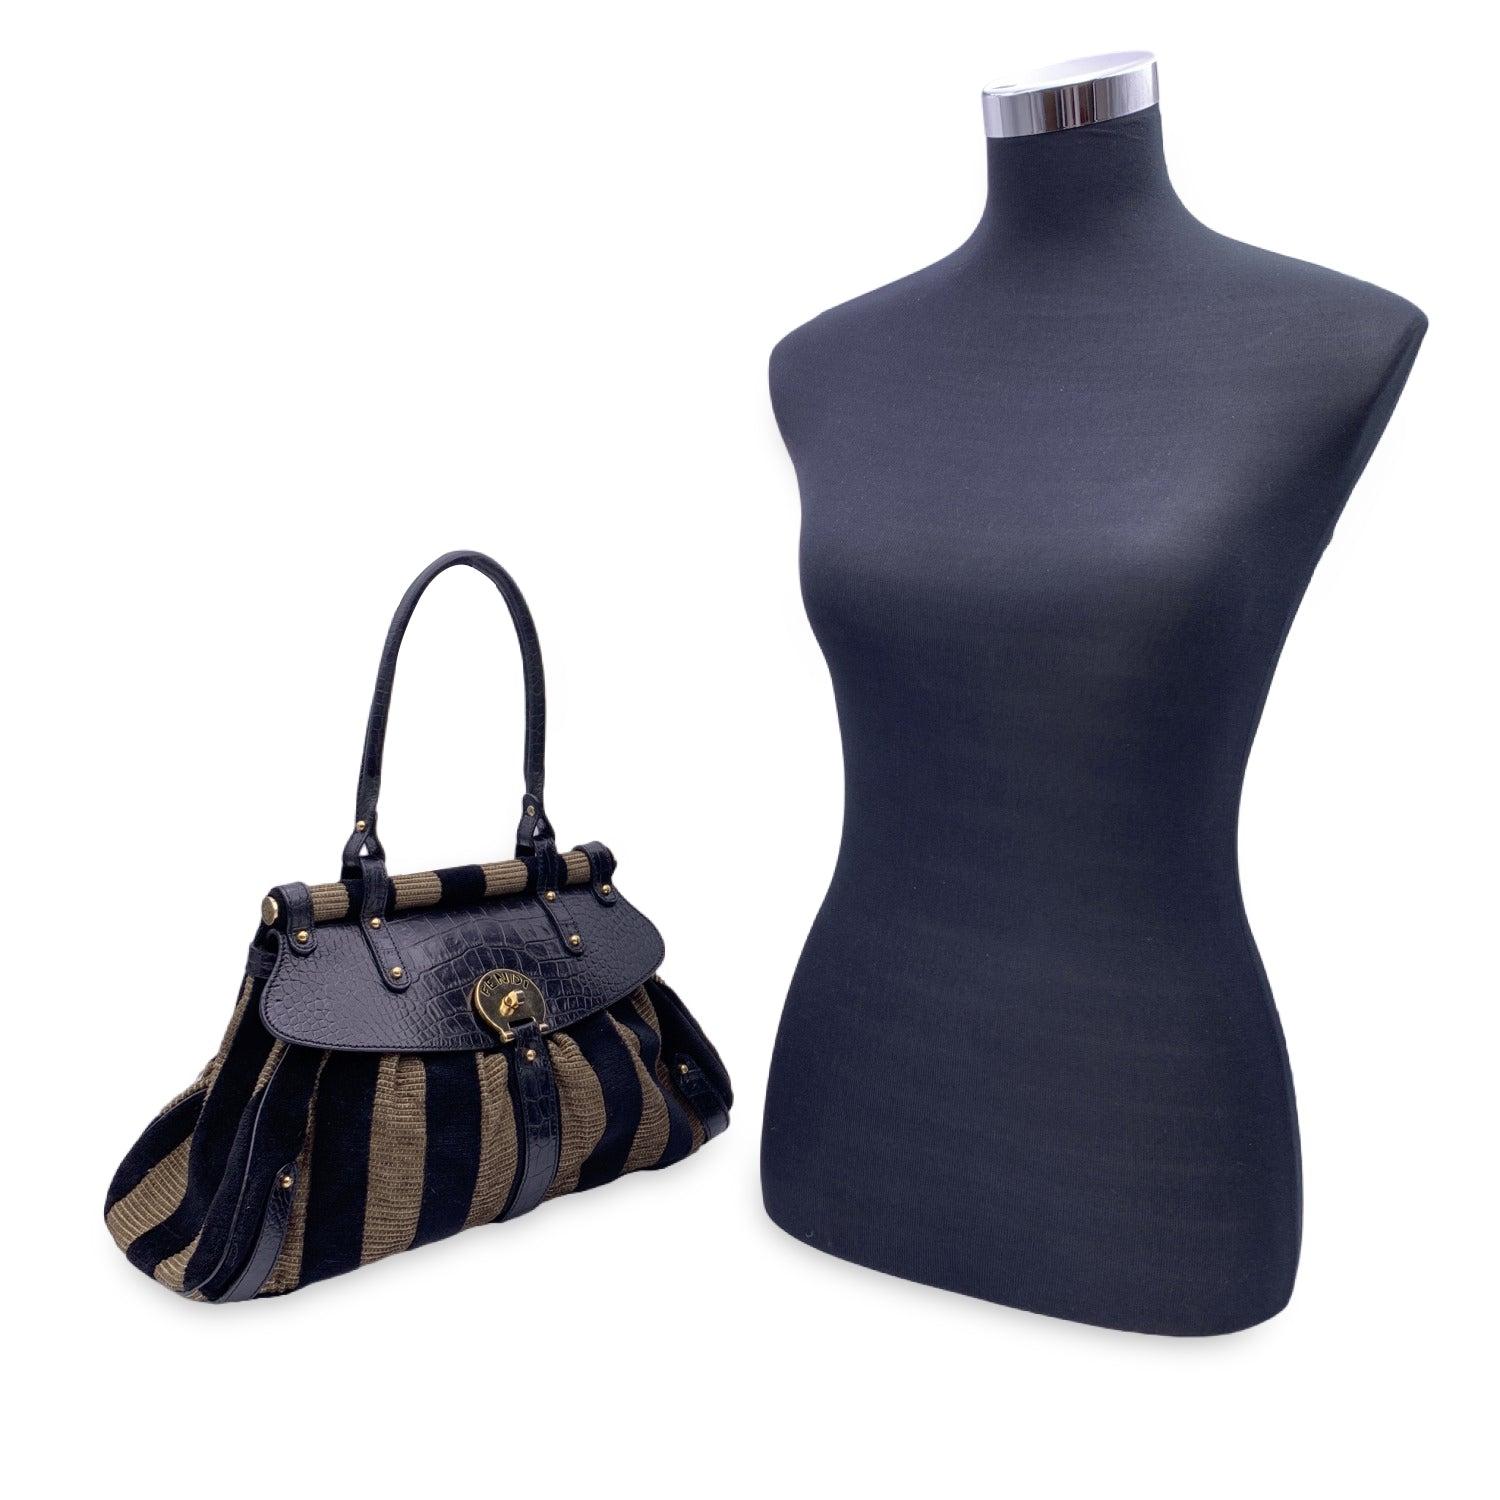 This beautiful Bag will come with a Certificate of Authenticity provided by Entrupy. The certificate will be provided at no further cost Beautiful 'Magic' Top handle bag by Fendi, from the 2005 collection. Tan and black velvet body with genuine